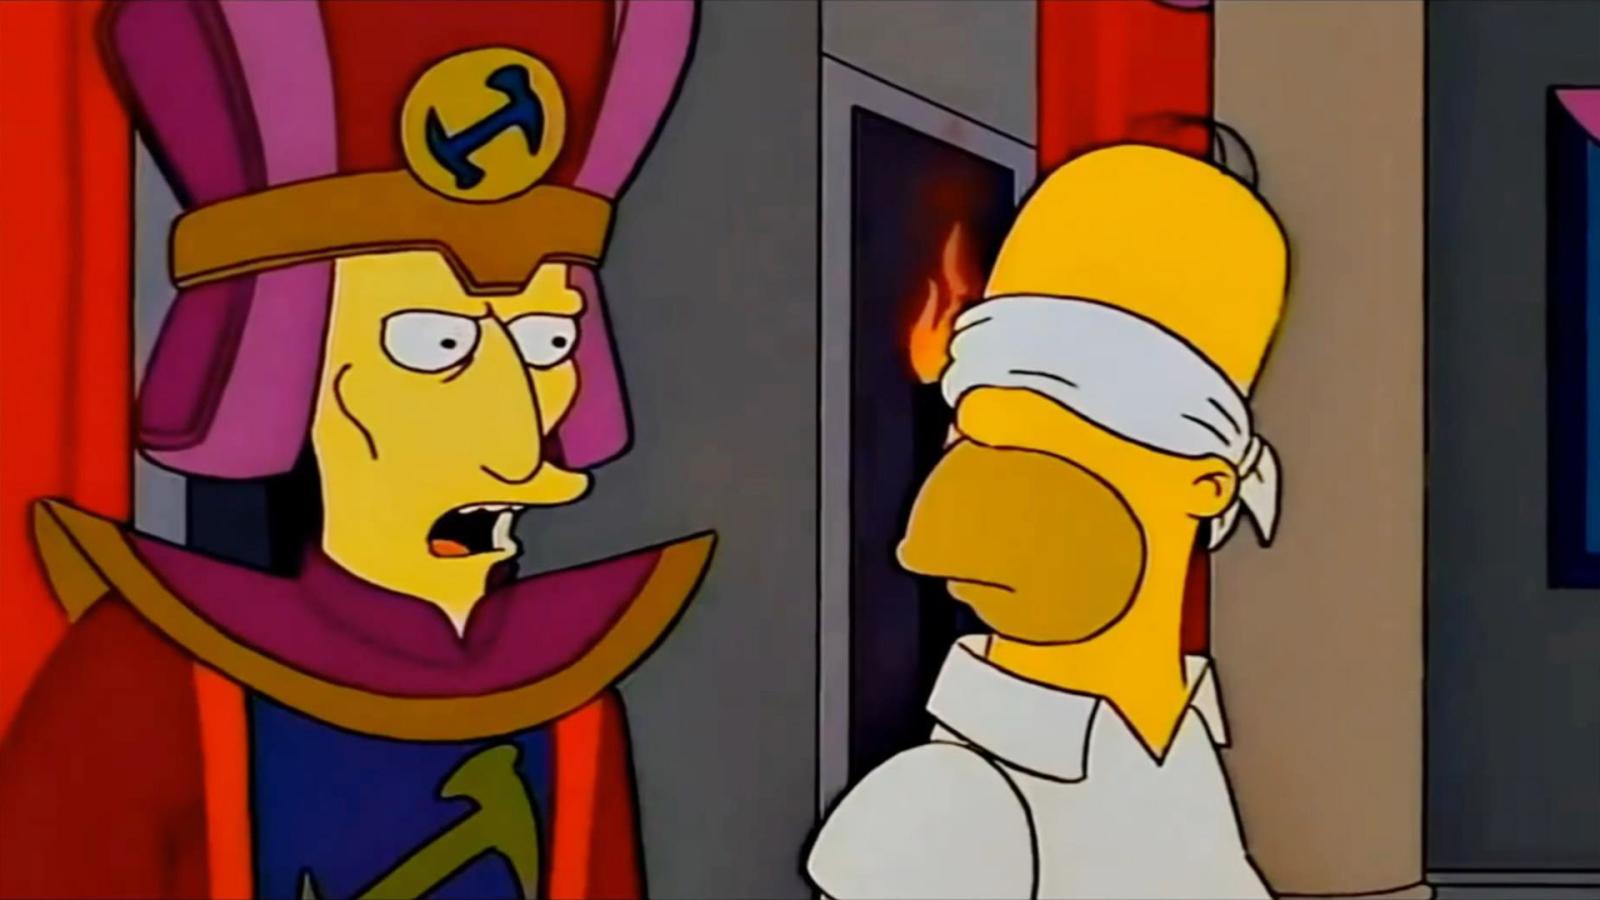 15 Most Unforgettable 'The Simpsons' Guest Stars - image 11